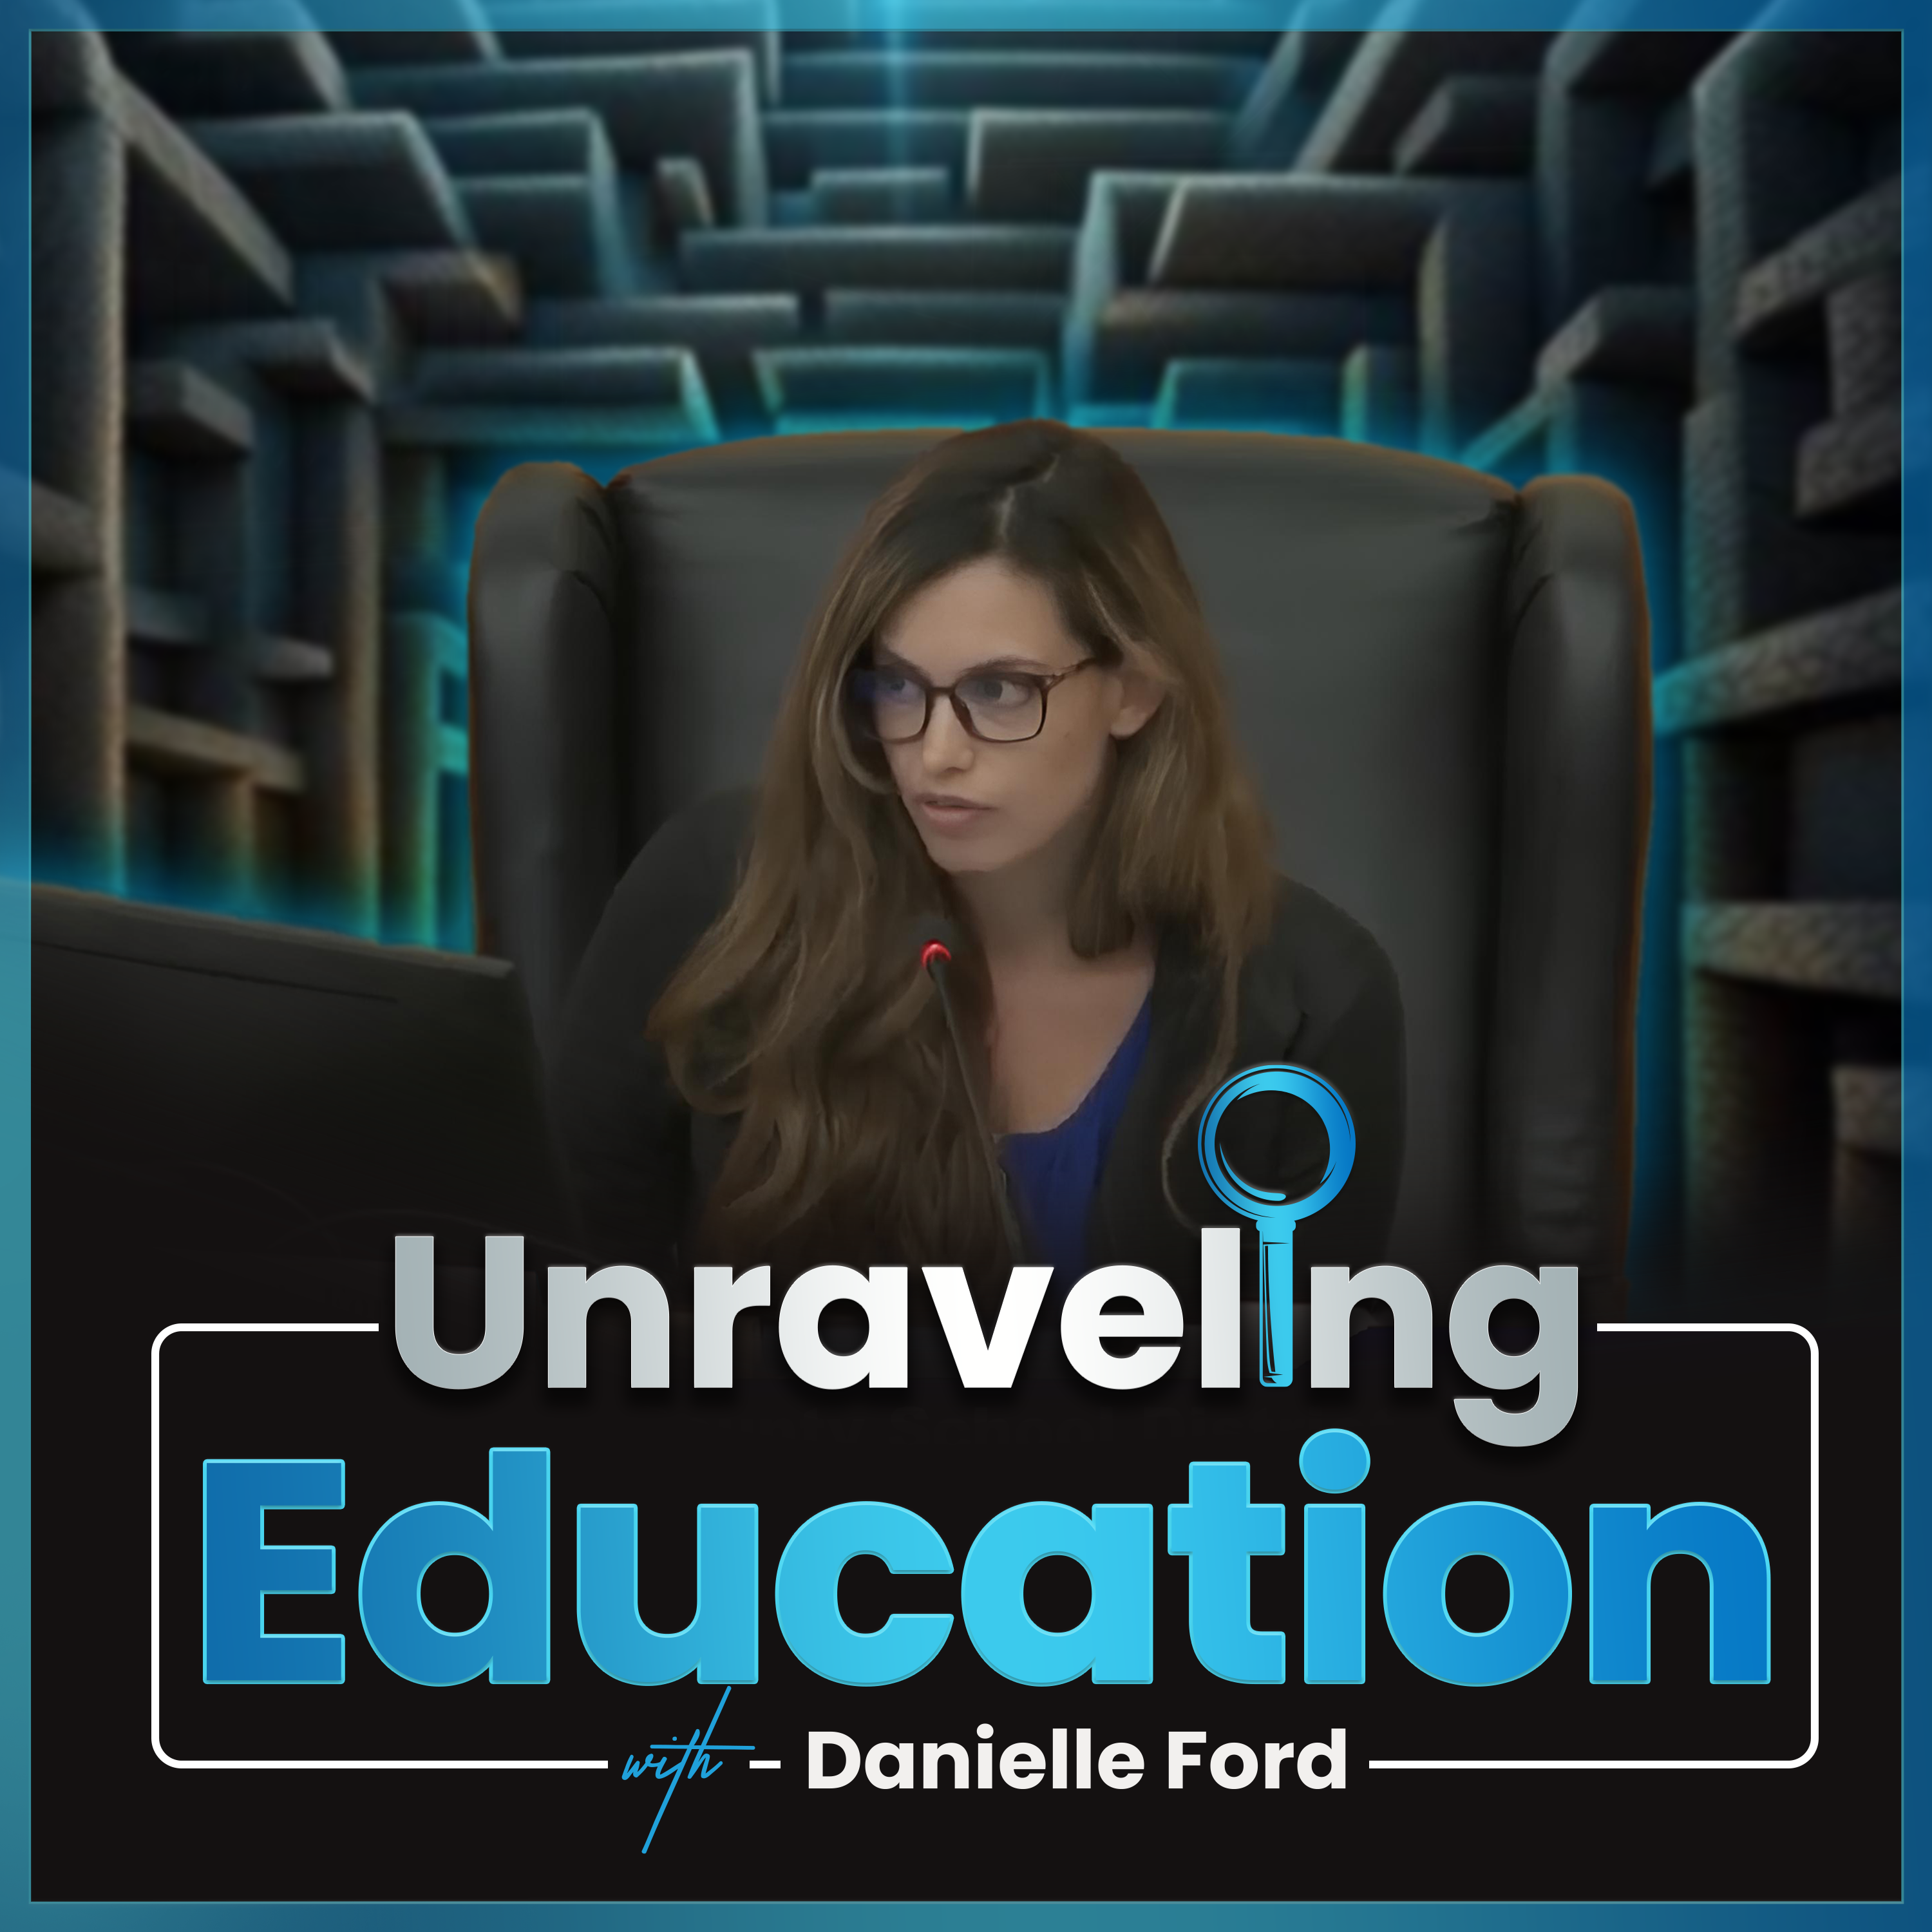 unraveling education podcast danielle ford nevada state board